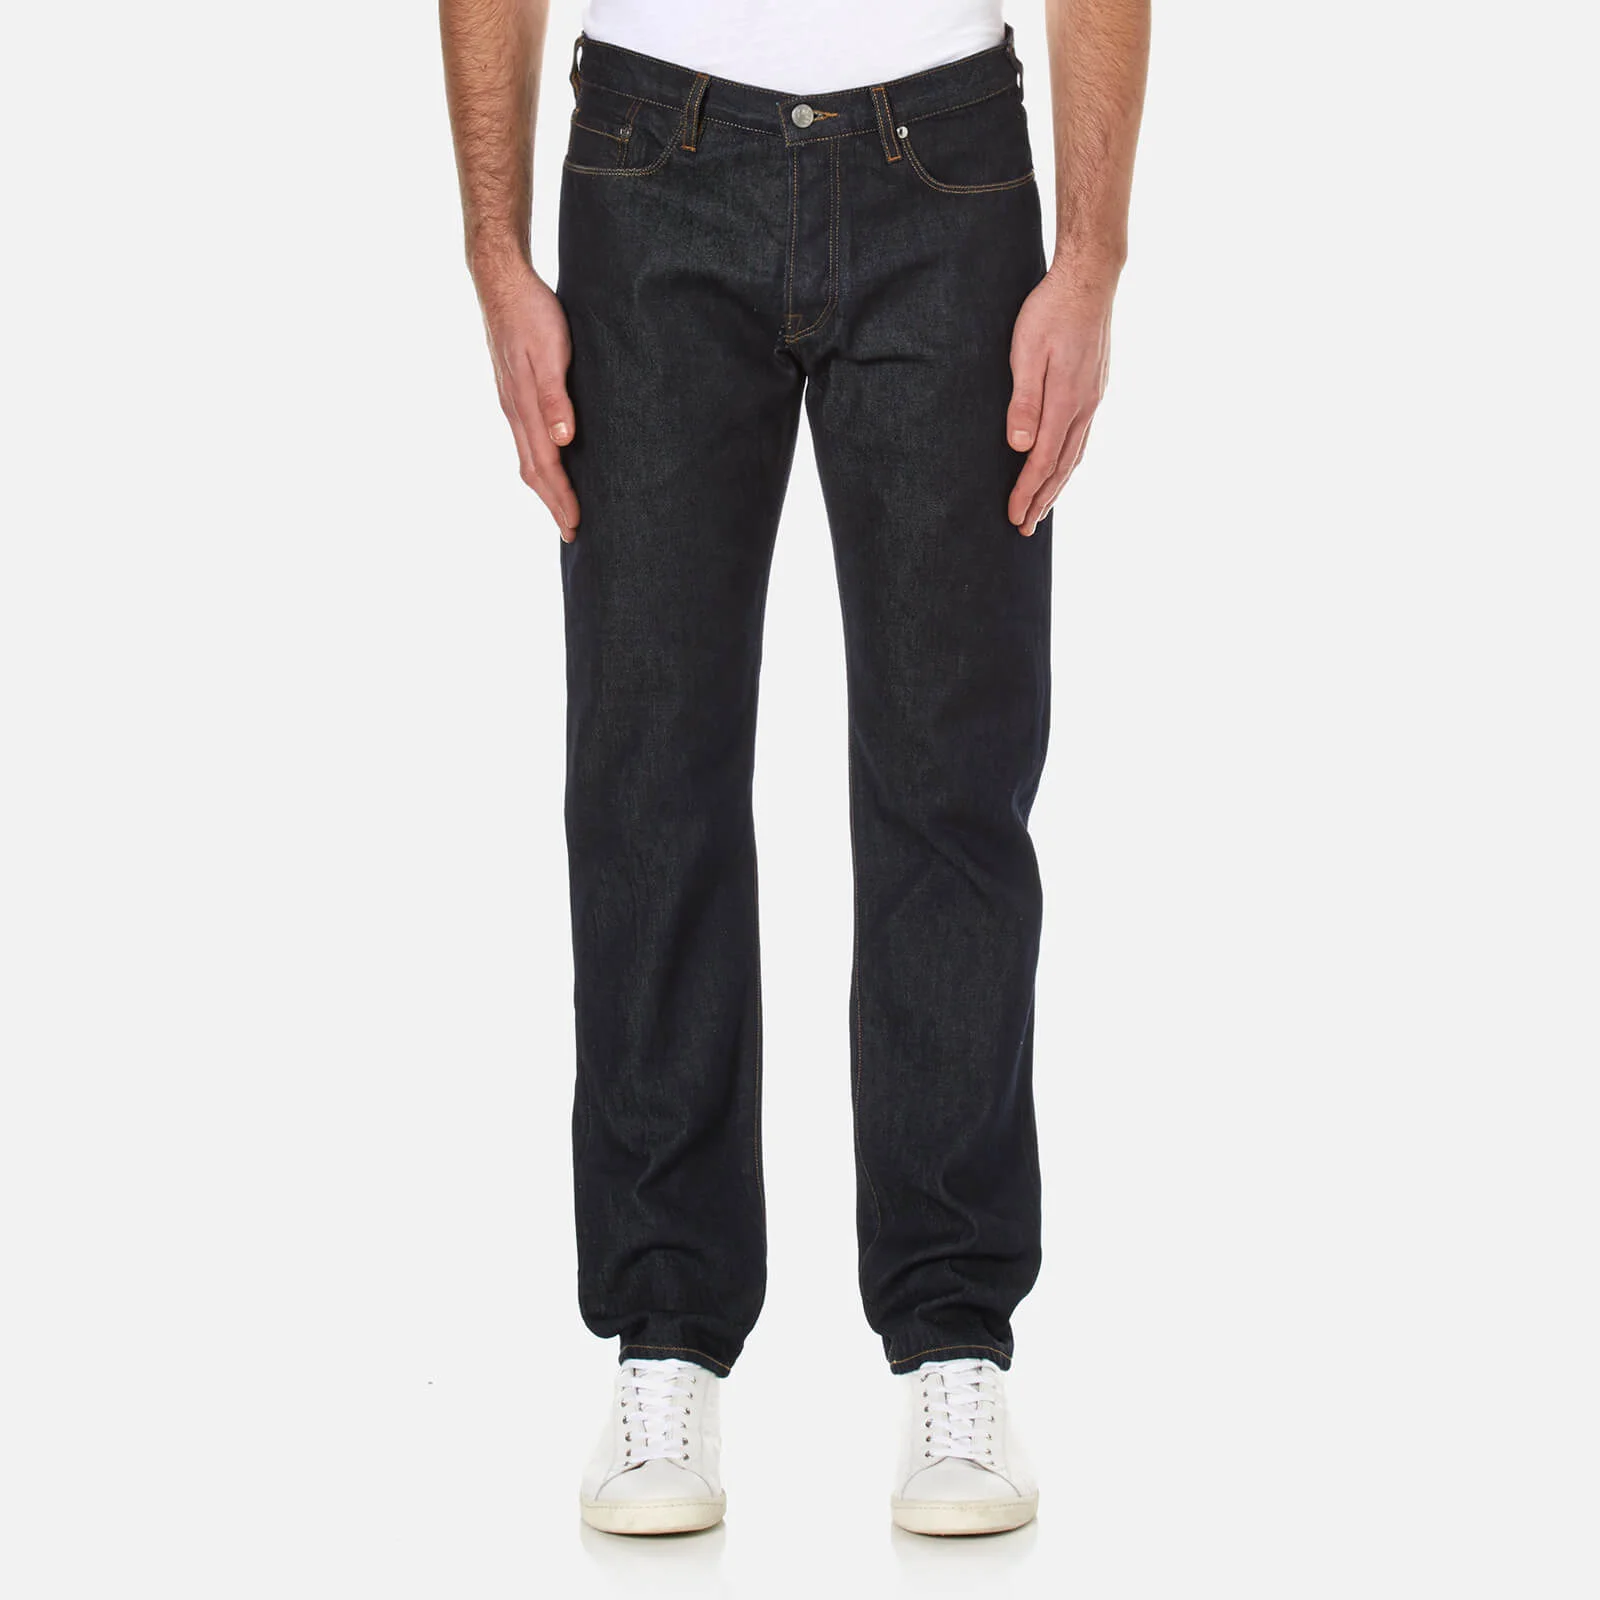 PS by Paul Smith Men's Tapered Fit Jeans - Indigo Image 1